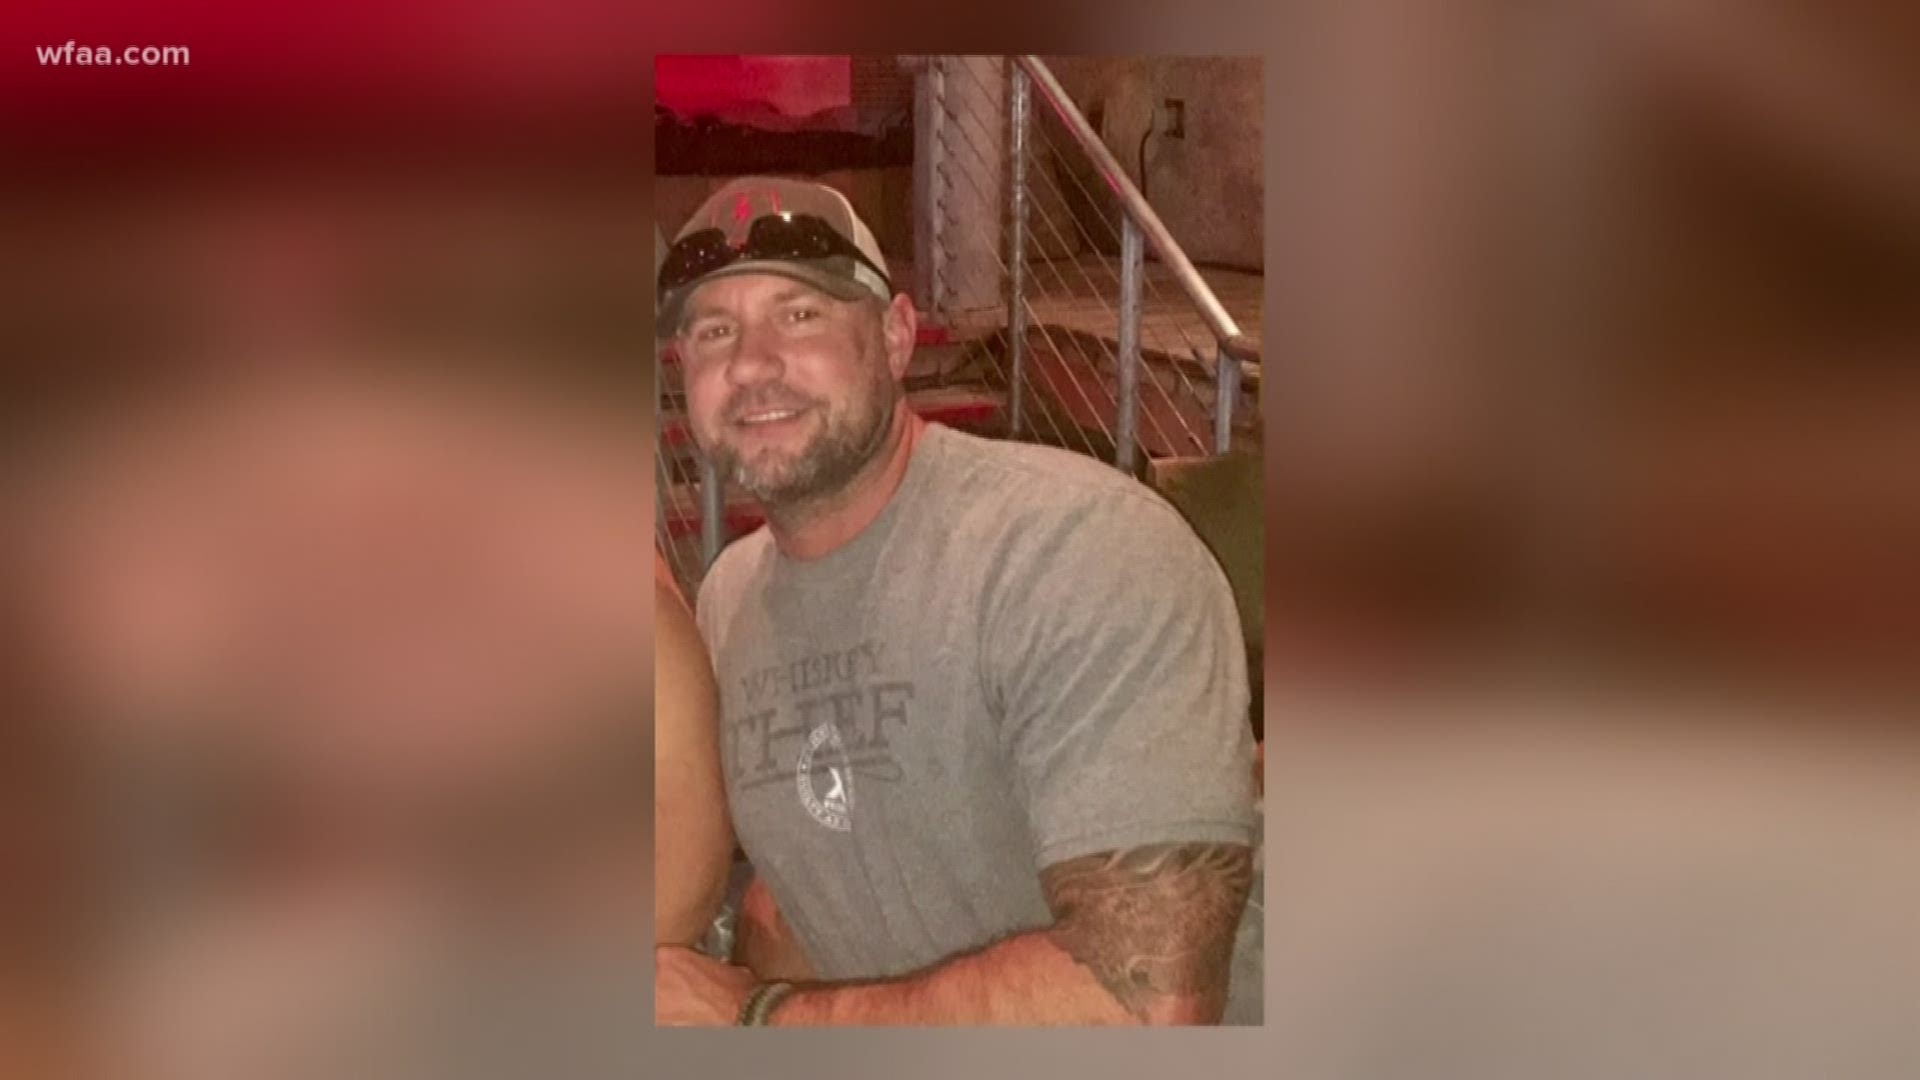 Some 72 hours after a robbery surveillance operation erupted in gunfire, the loss of Fort Worth Officer Garrett Hull is no easier to understand or accept.